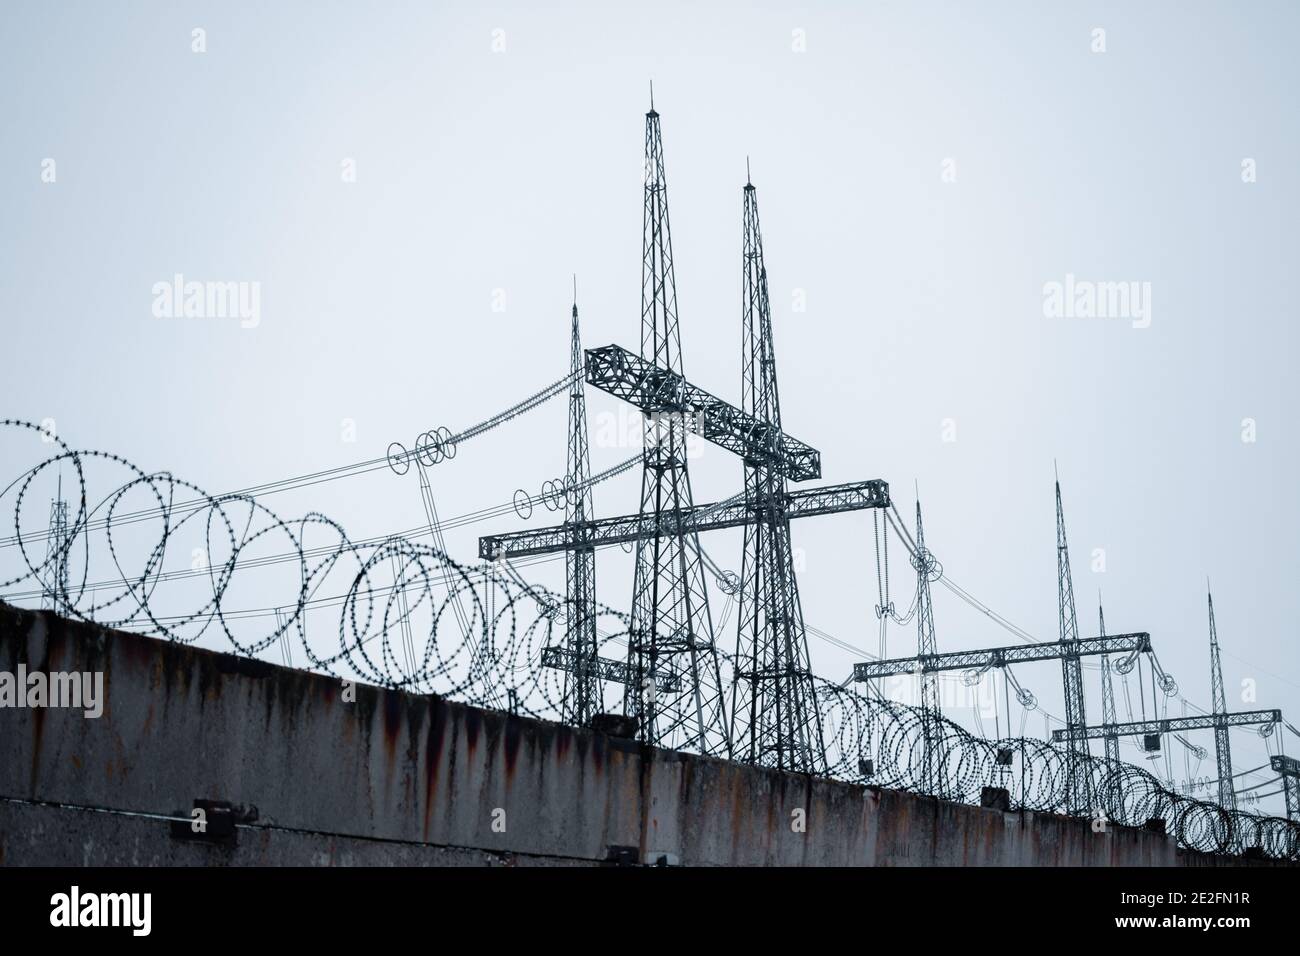 High-voltage power lines behind a fence with barbed wire. Stock Photo